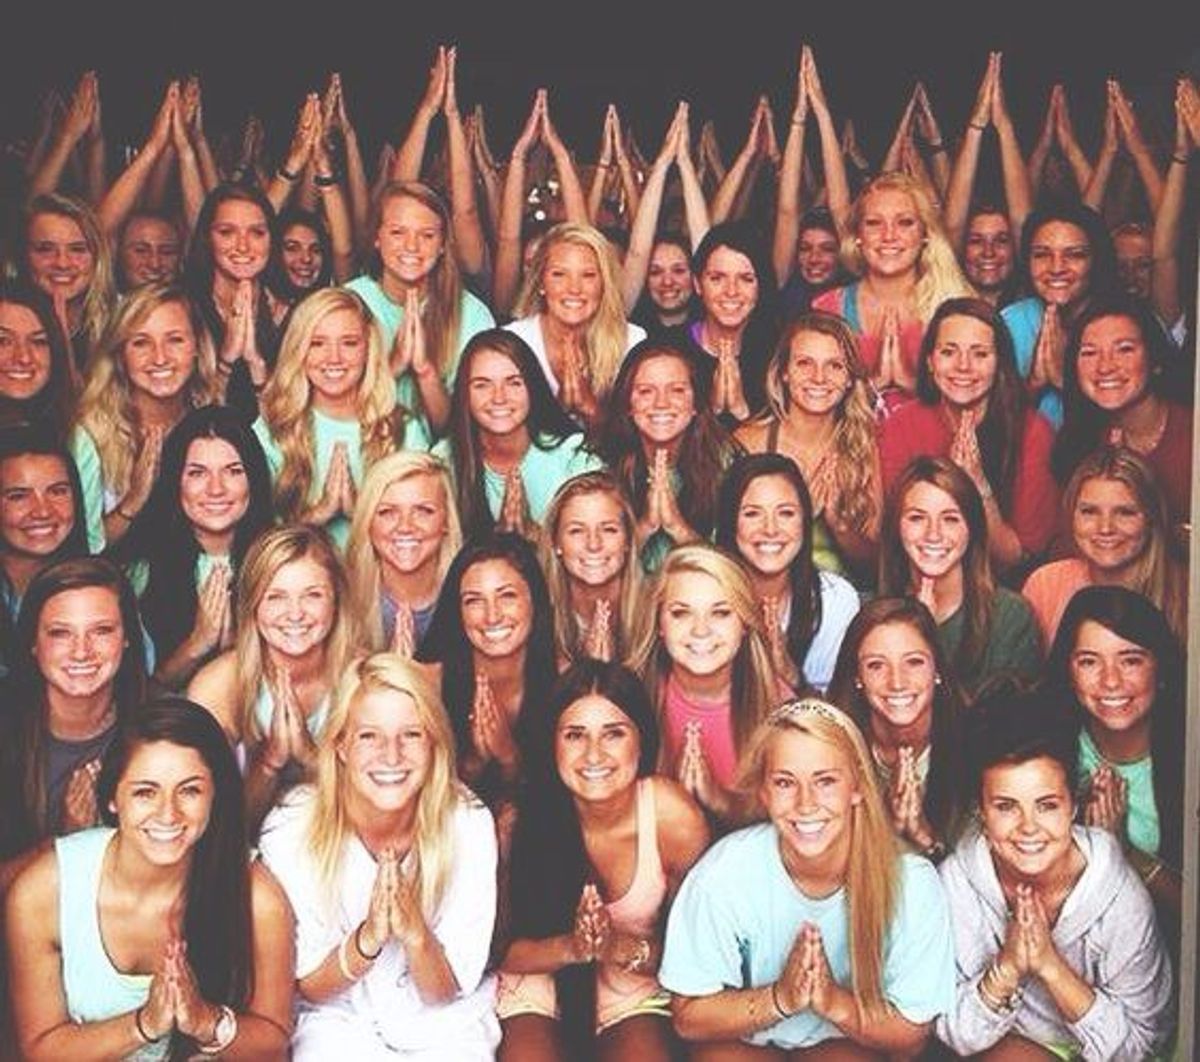 11 Thoughts You Have During Sorority Recruitment Workshops